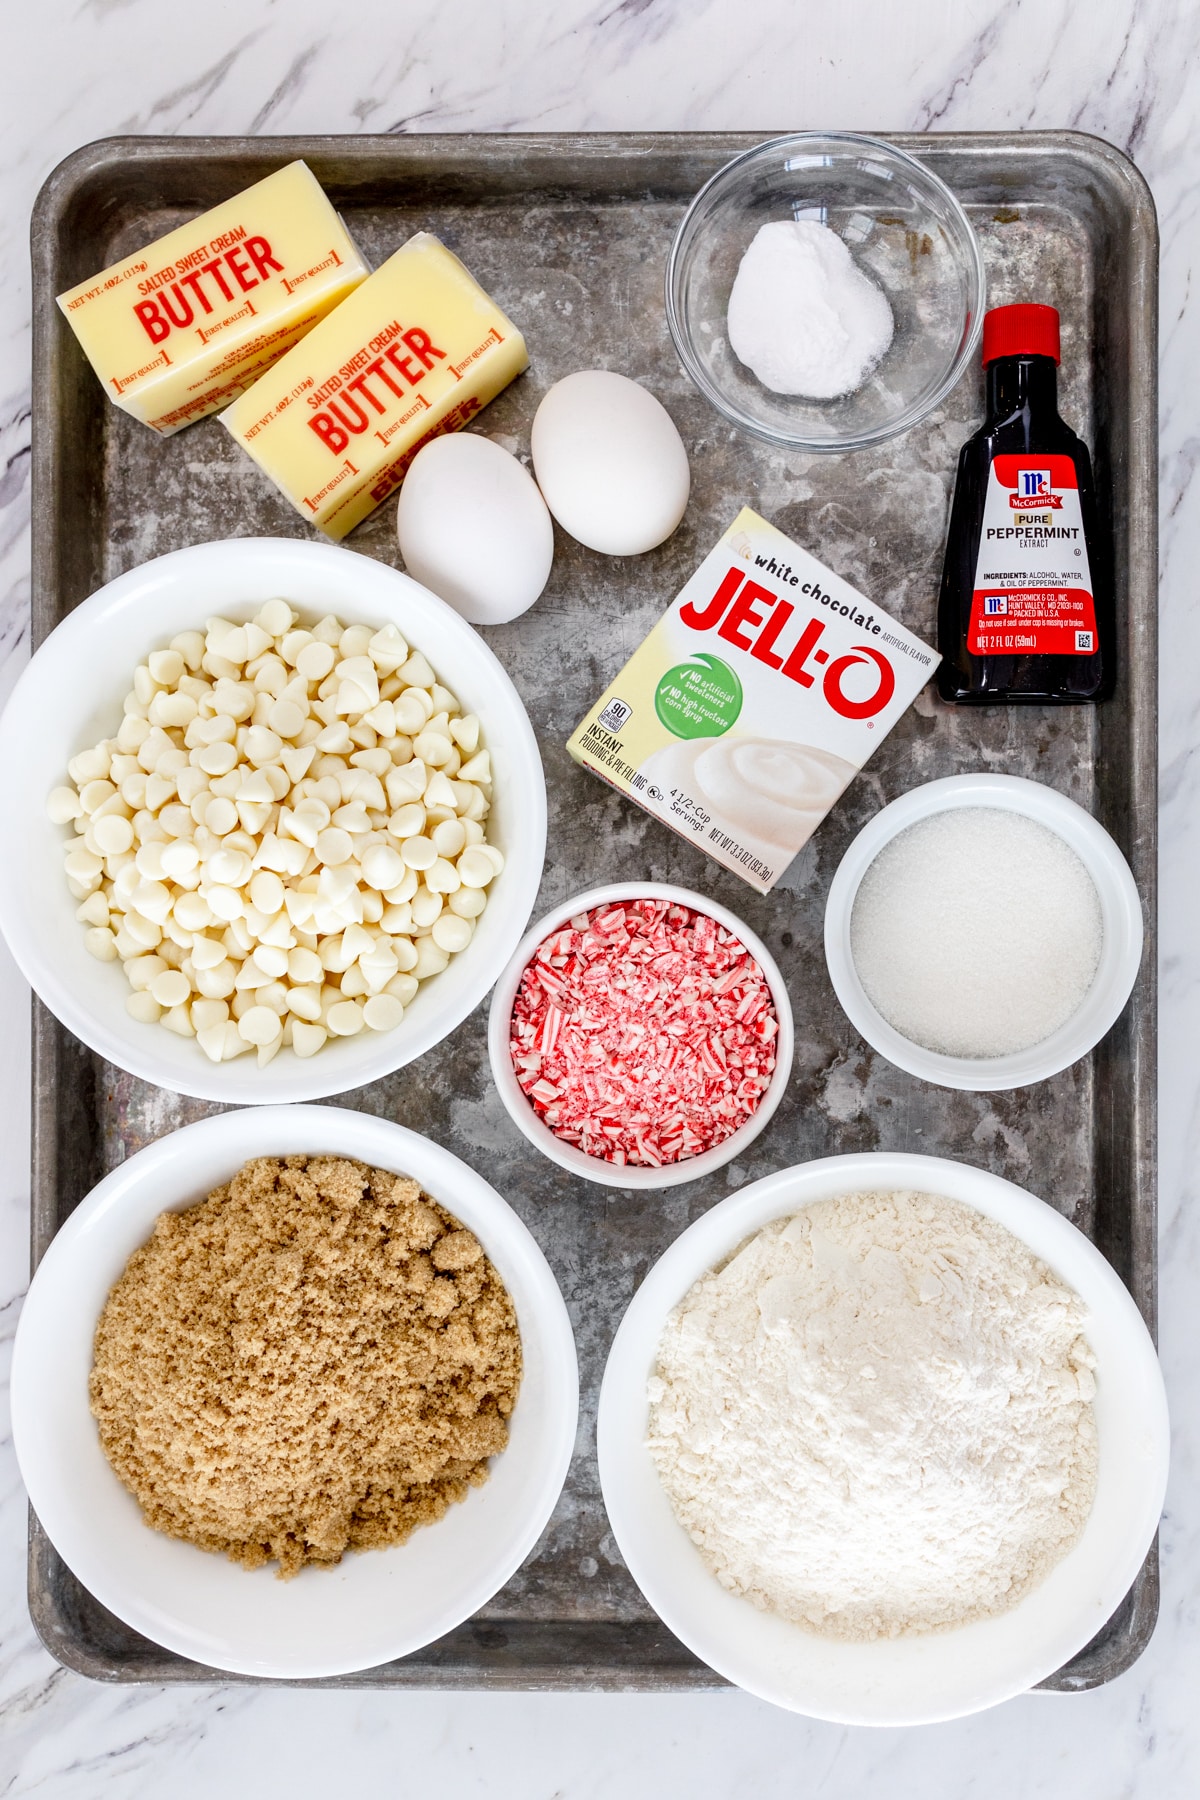 Top view of ingredients needed to make White Chocolate Peppermint Cookies in small bowls on a baking tray.